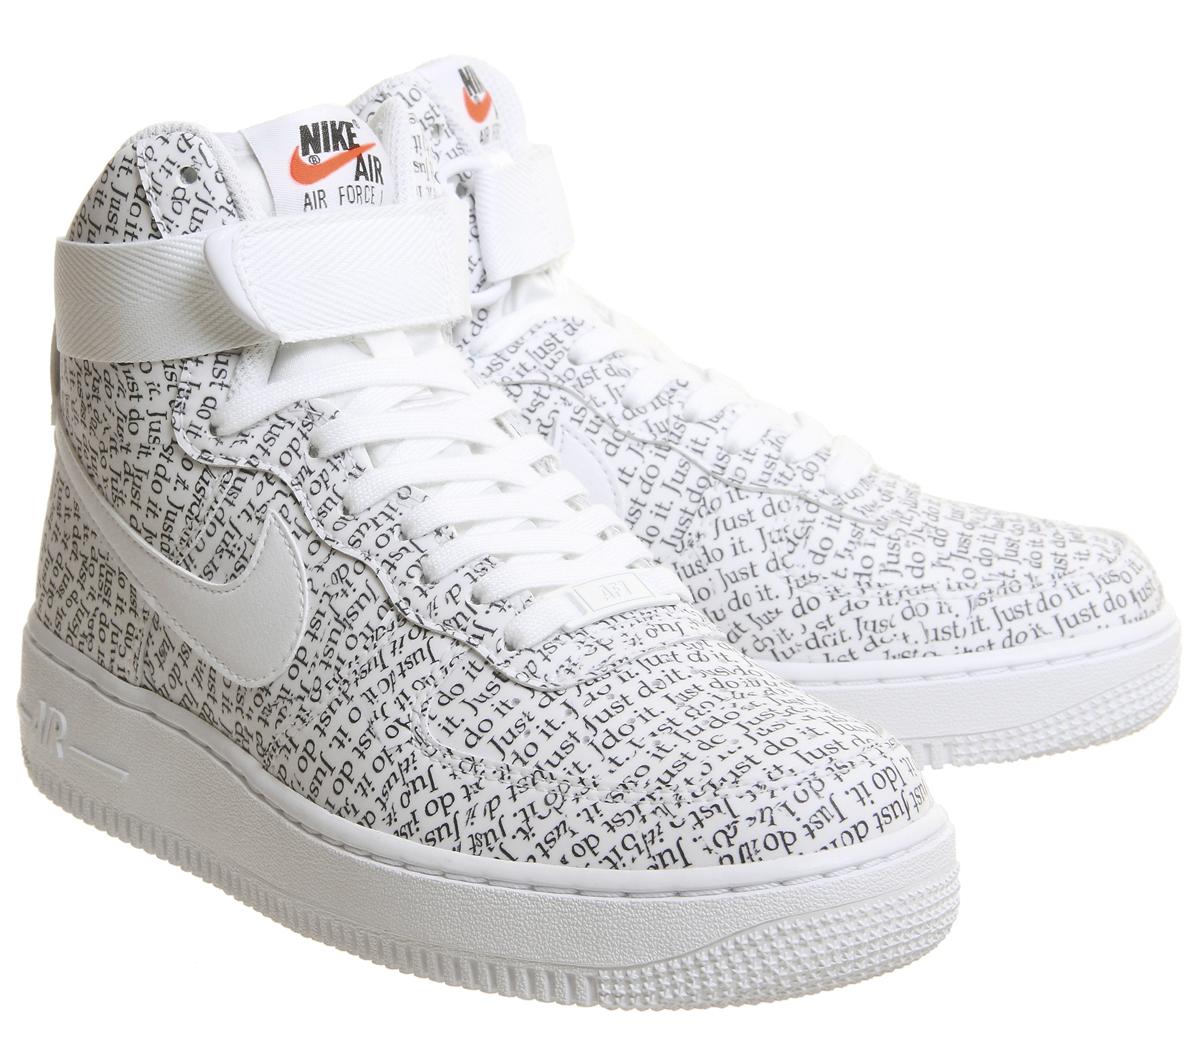 nike just do it trainers air force 1